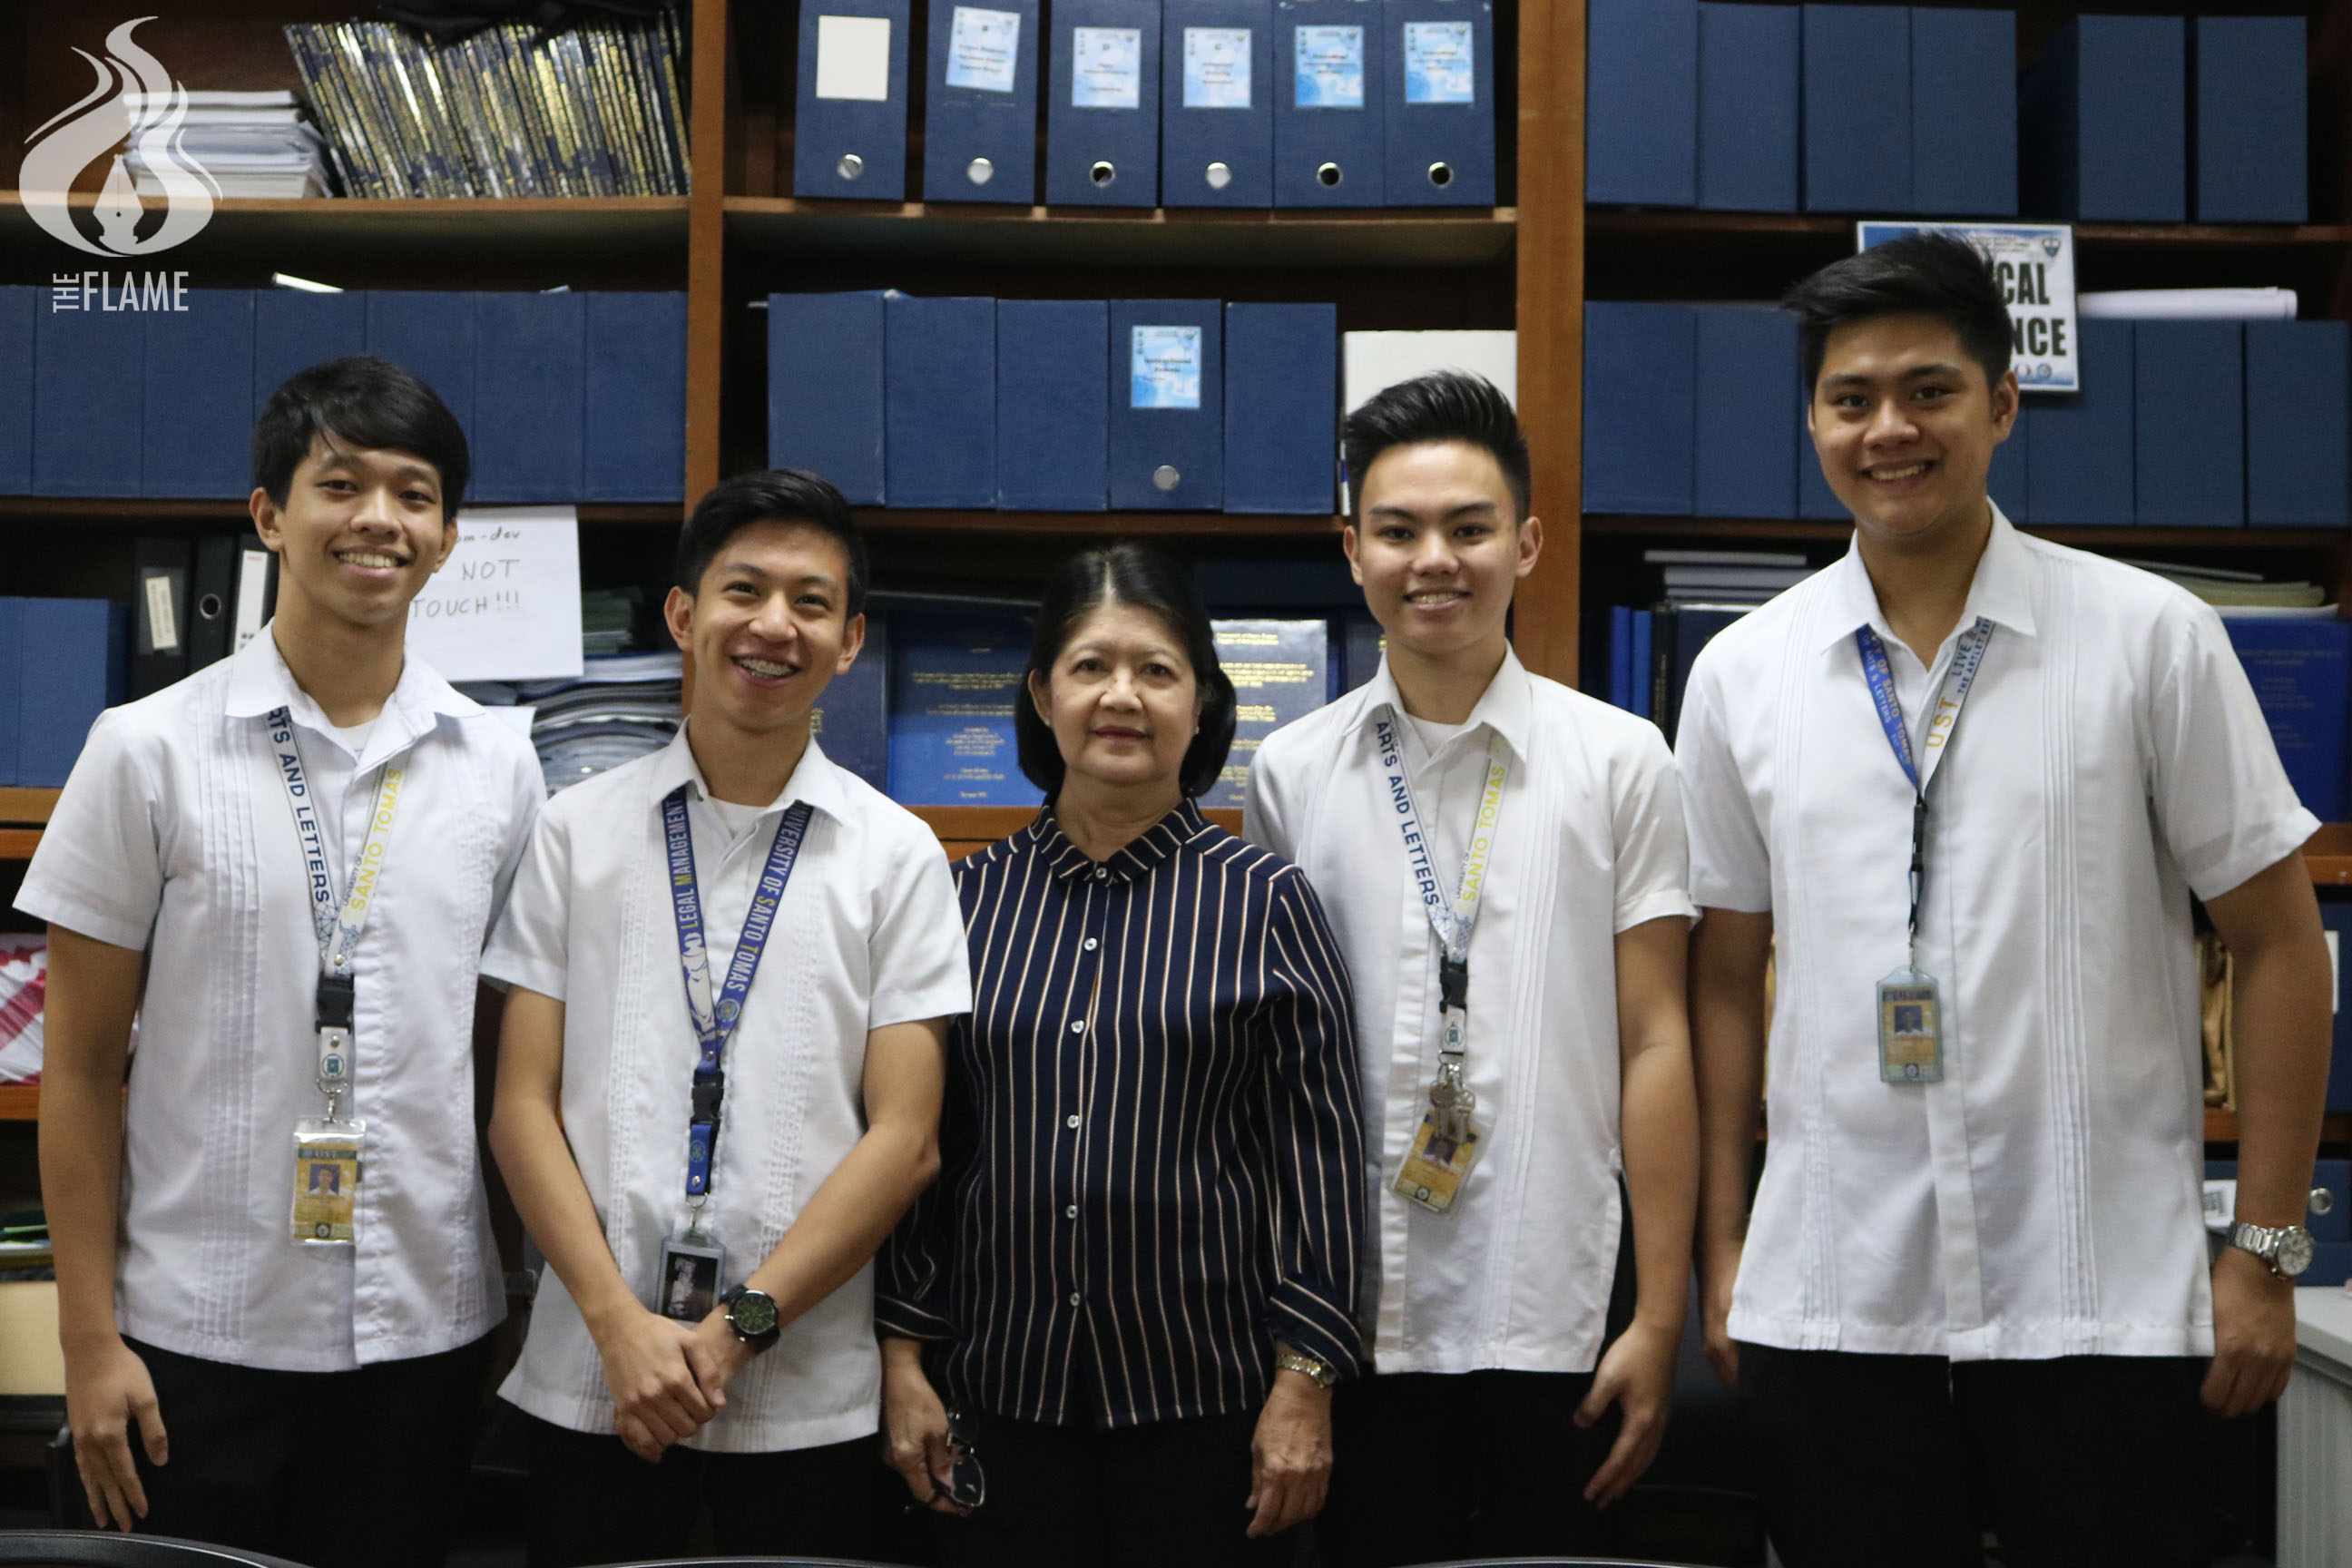 New ABSC officers take oath, vow for a ‘fully-geared’ council